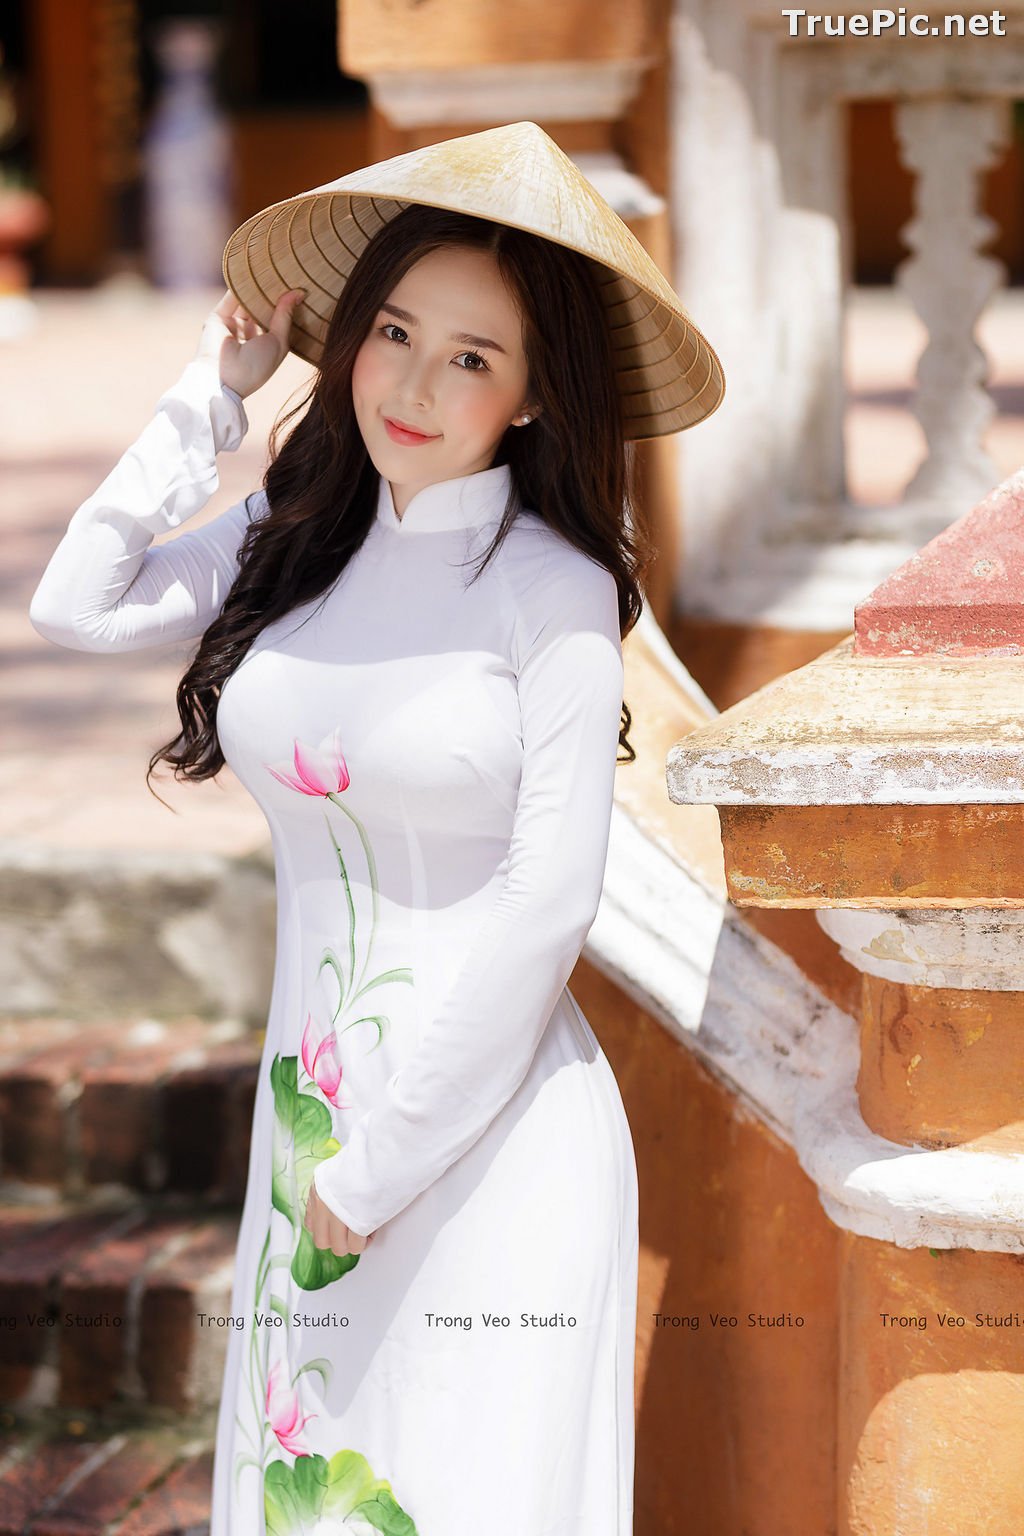 Image The Beauty of Vietnamese Girls with Traditional Dress (Ao Dai) #1 - TruePic.net - Picture-40